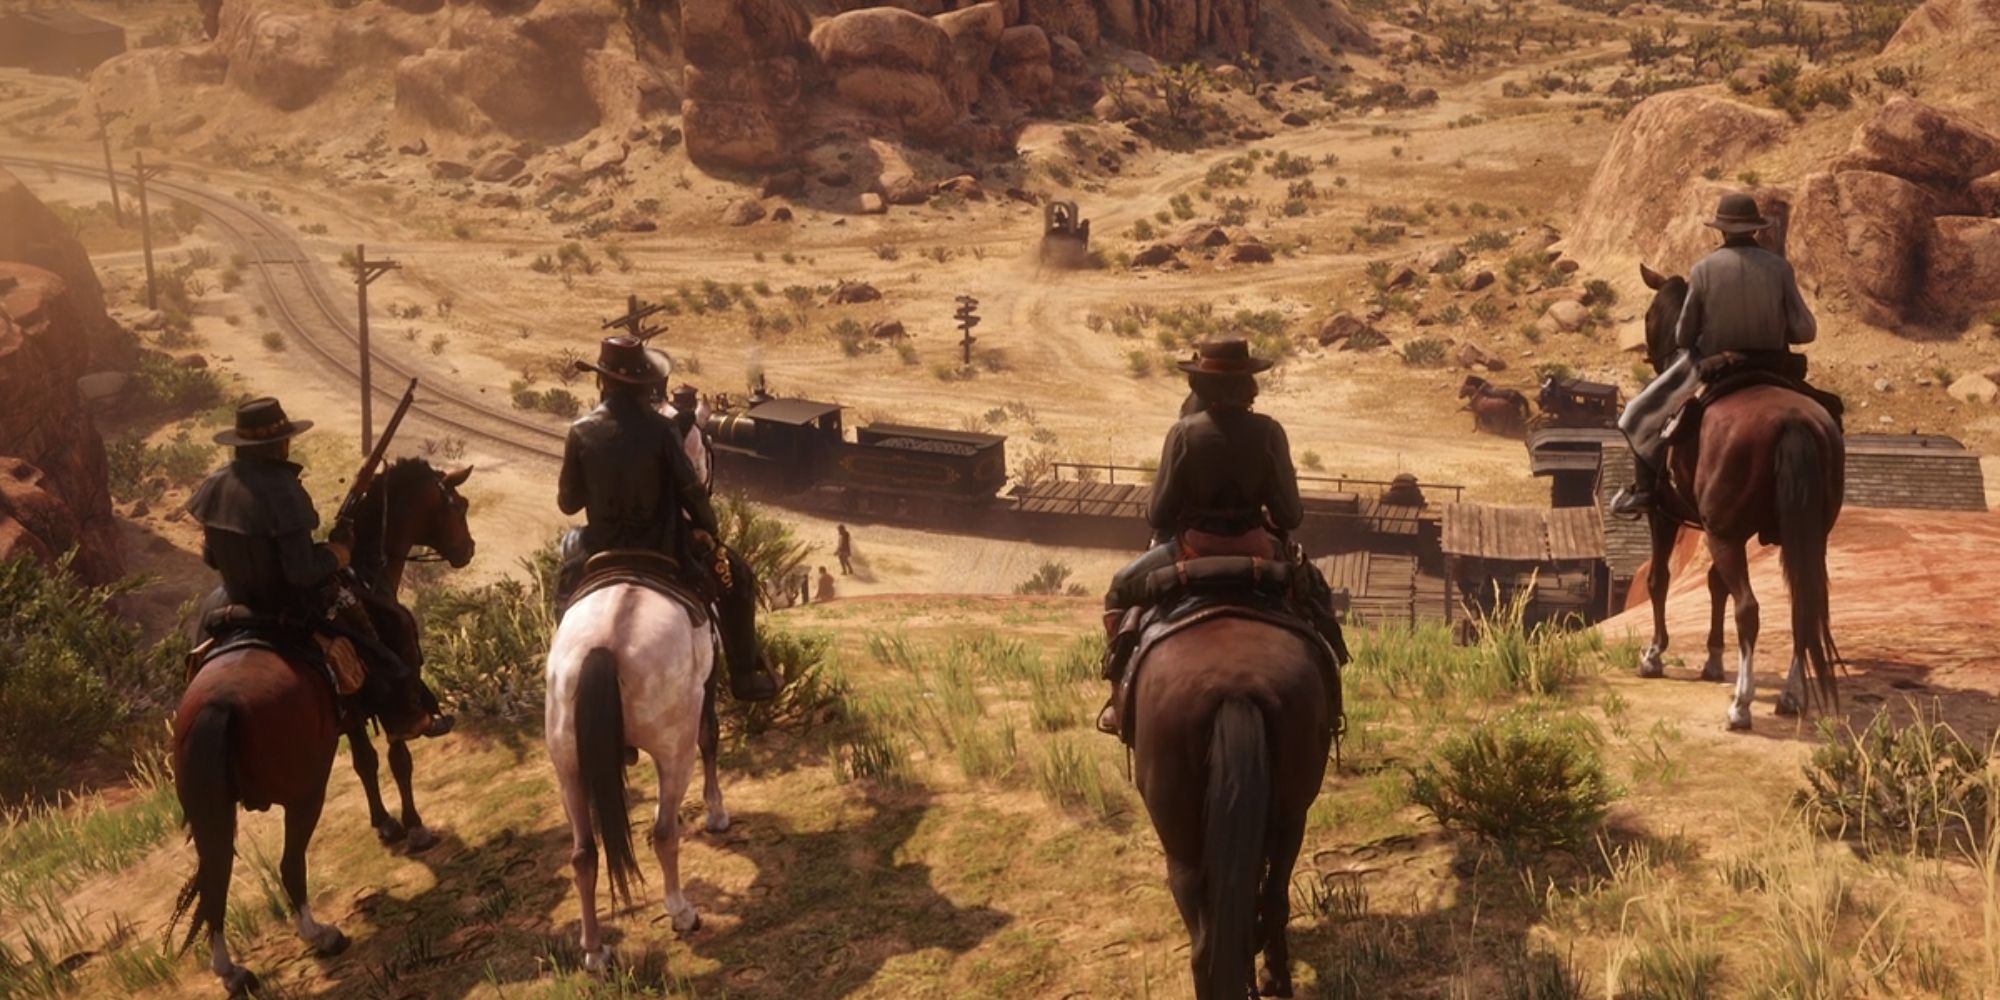 Red Dead Online Roles: How does the Moonshiner role work, and what